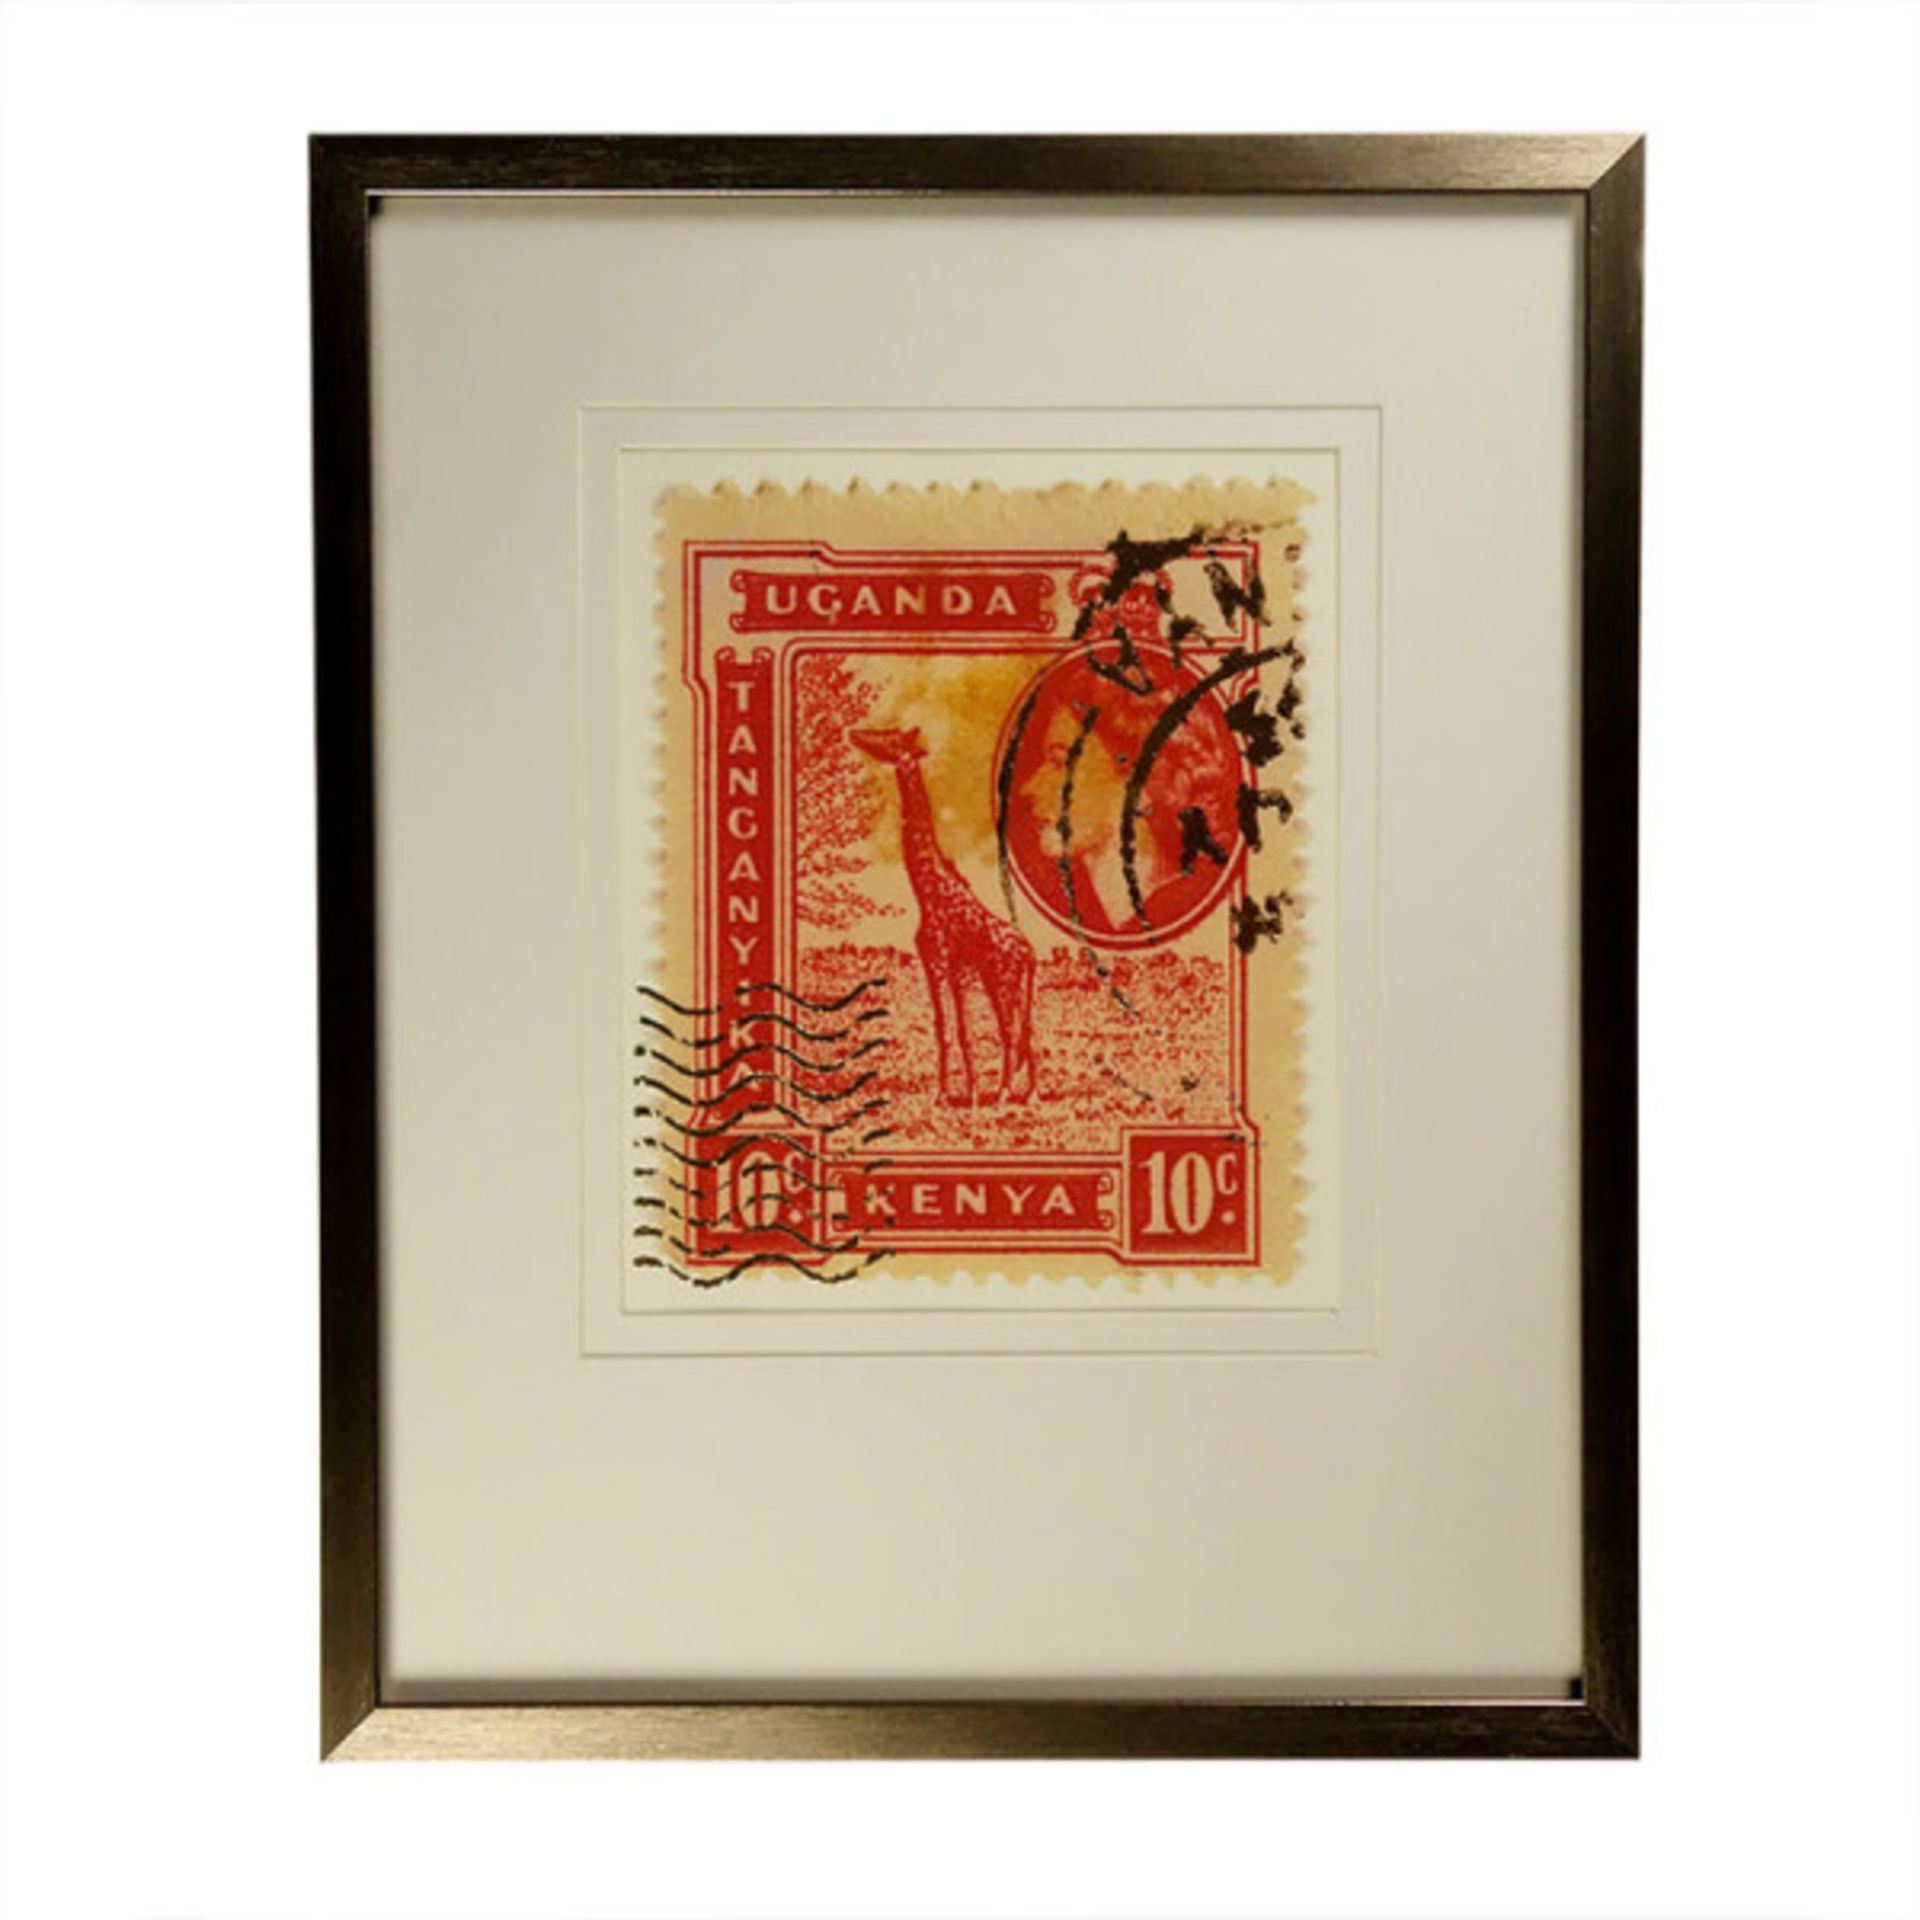 Coup & Co Art Postage Stamp Uganda Giraffe carton dimensions 51 x 61cm Coup & Co limited edition